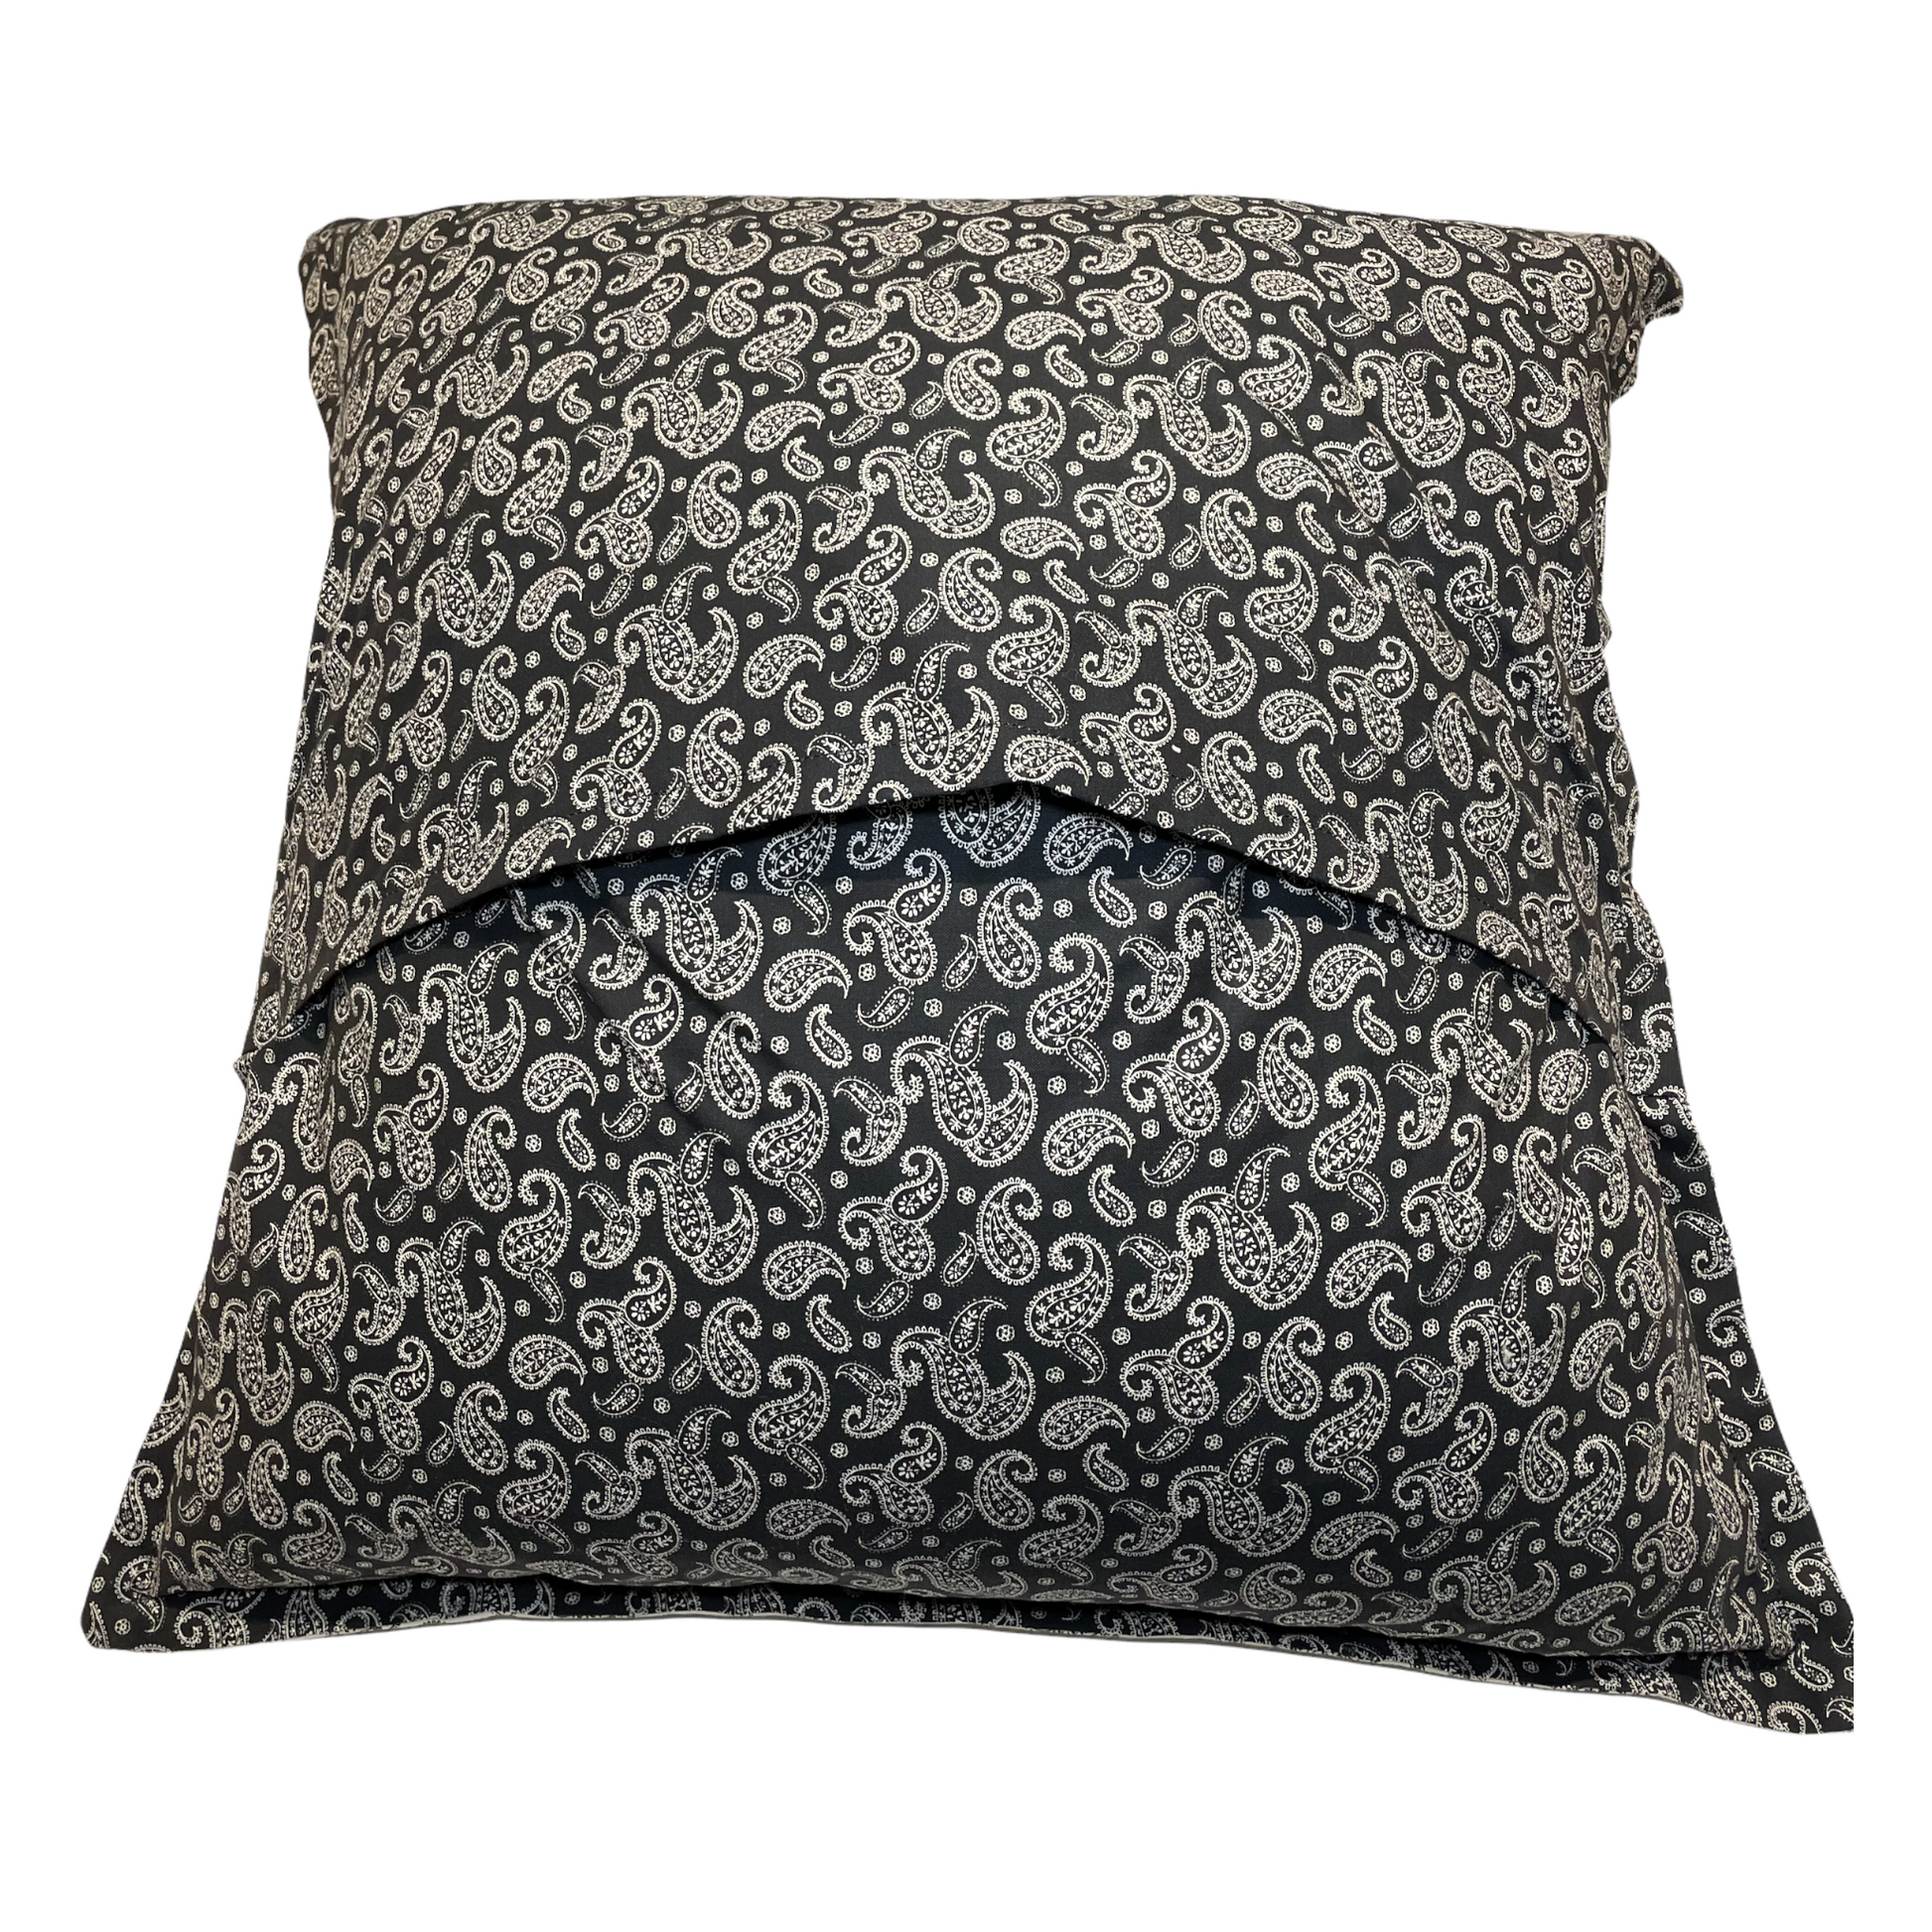 Throw Pillow Cover handcrafted in Canada by Home Stitcher Decor. Beige and black flowers on front and beige and black paisley design on back. 18x18 Pillow cover. Easily Change your Decor with decorative pillow covers.